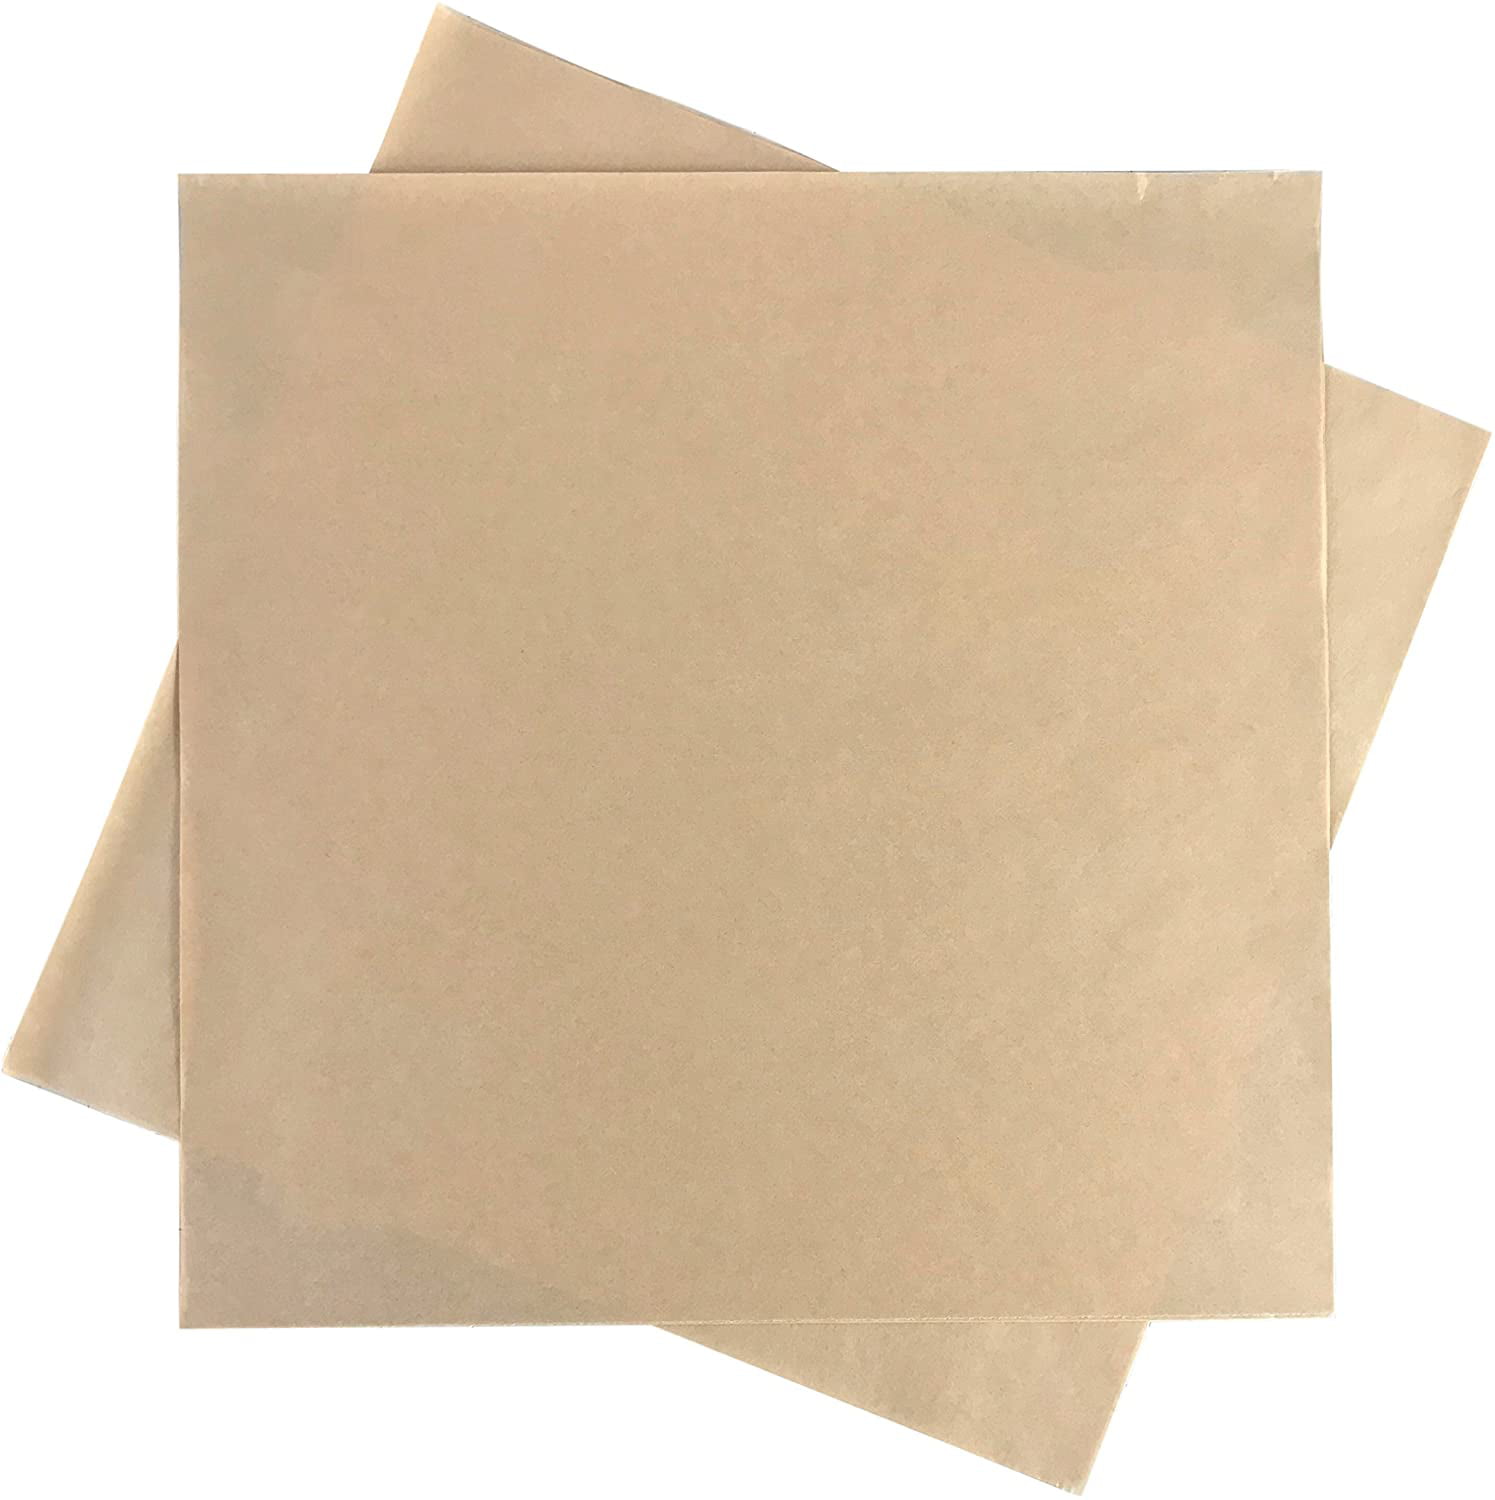 BakeChoice 12 x 12 Parchment Paper Square Kraft Deli Wrap Sheets (100 Pack) - Food Liners for Trays, Baskets - Ideal for Air Fryer, Oven